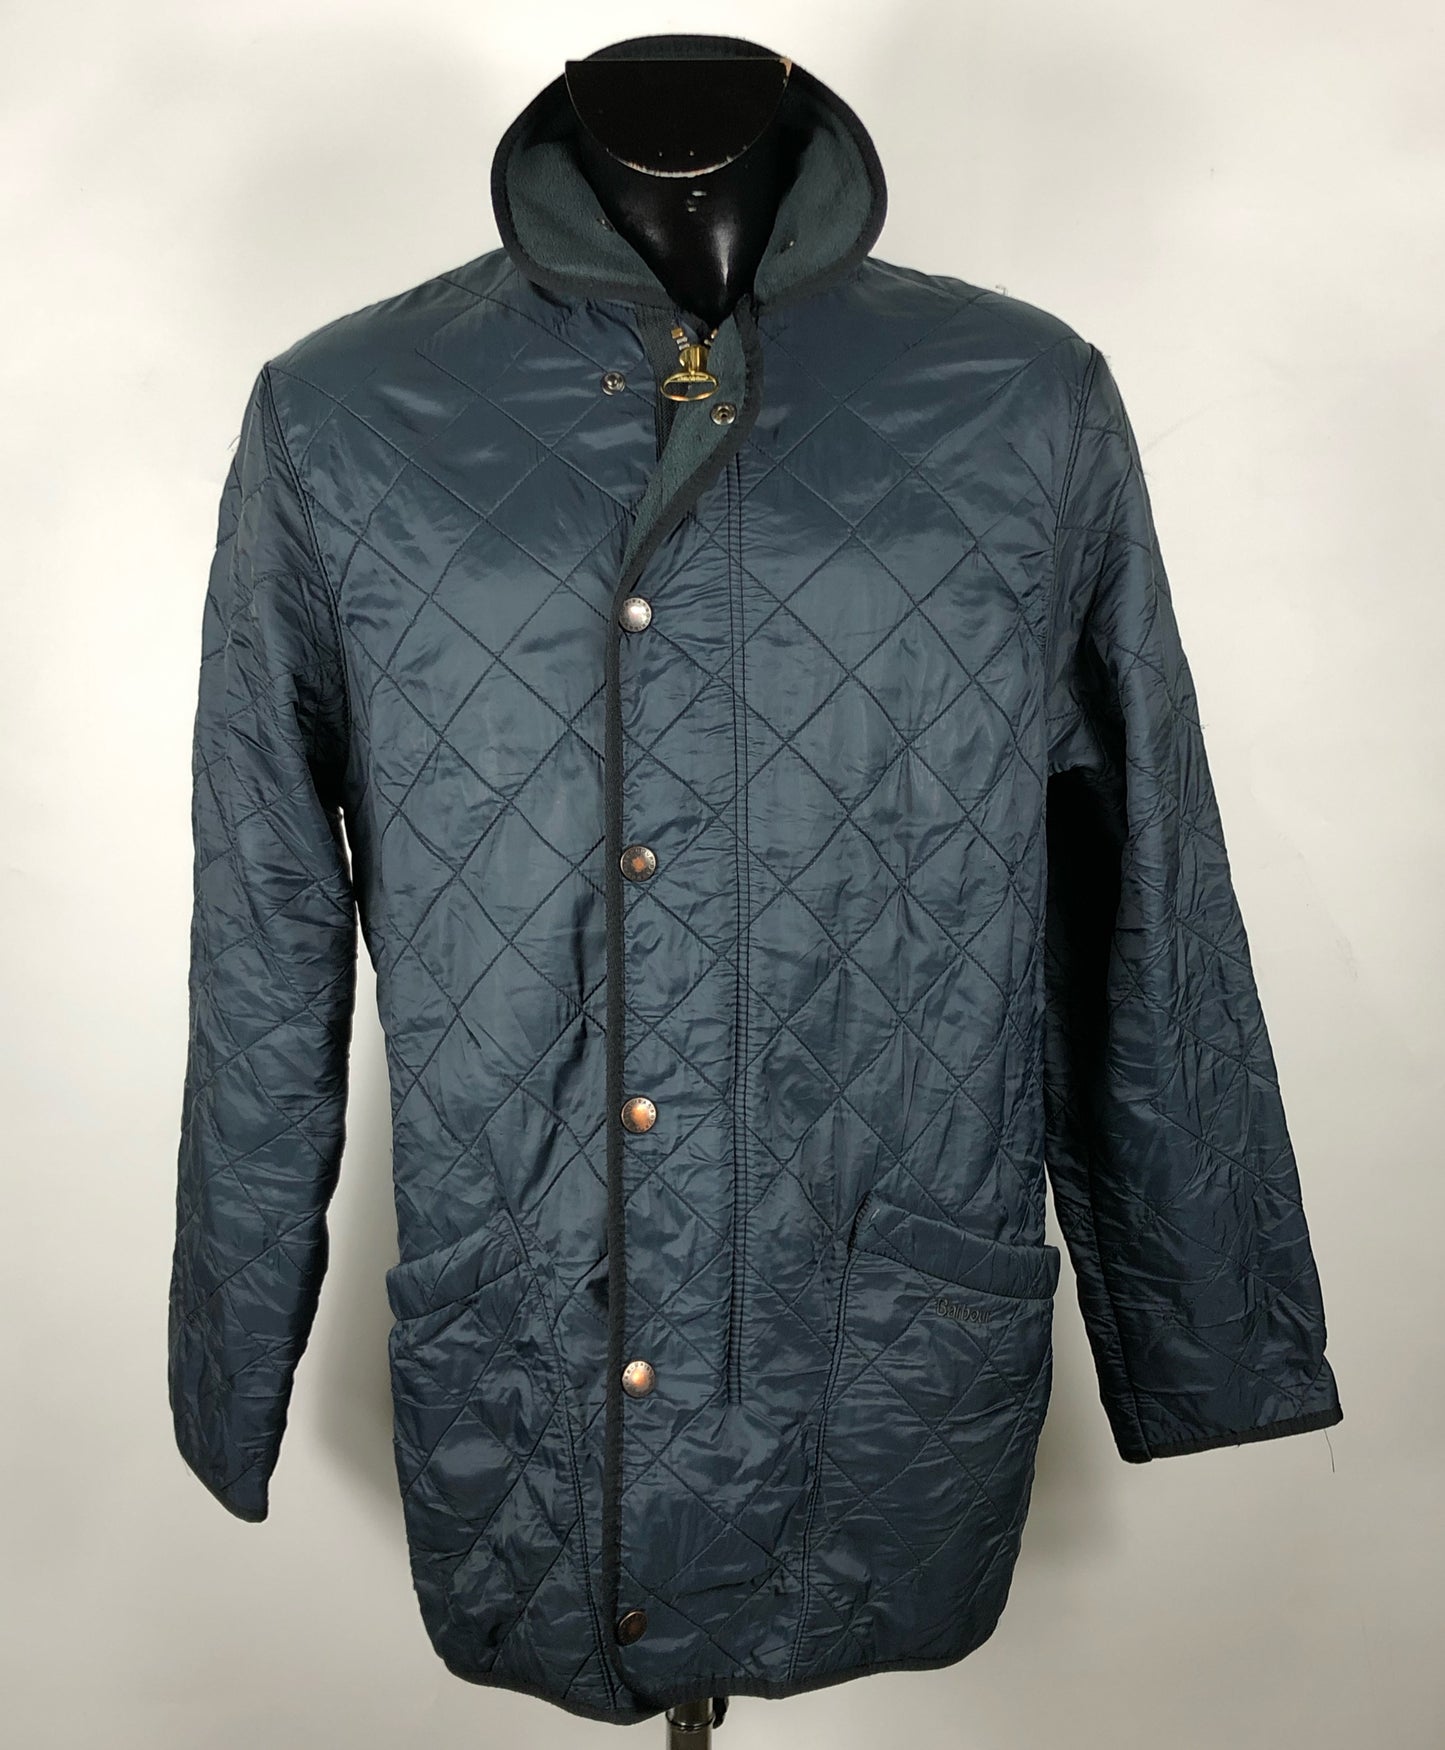 Giacca a vento trapuntata Barbour Blu Medium - Quilted Duracotton Navy Jacket Size M